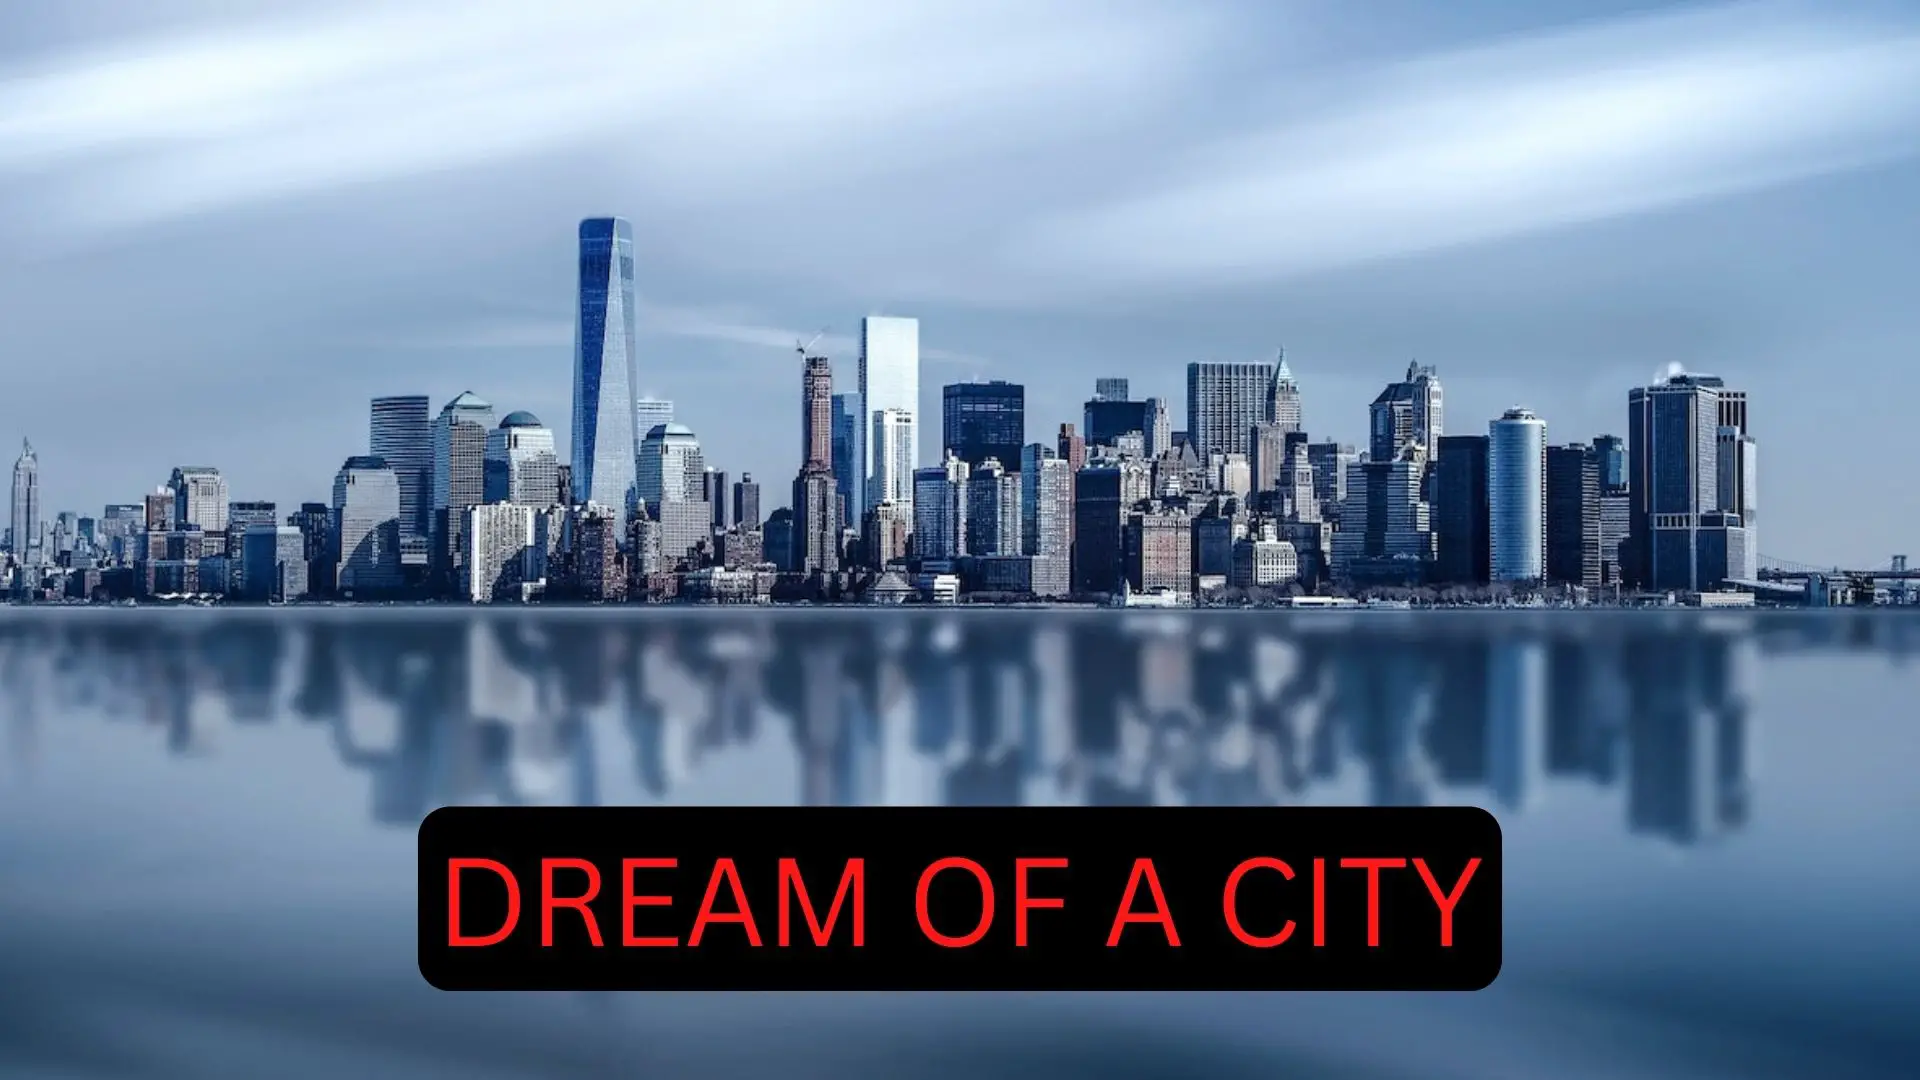 Dreams Of New York As Reflections Of Social Issues